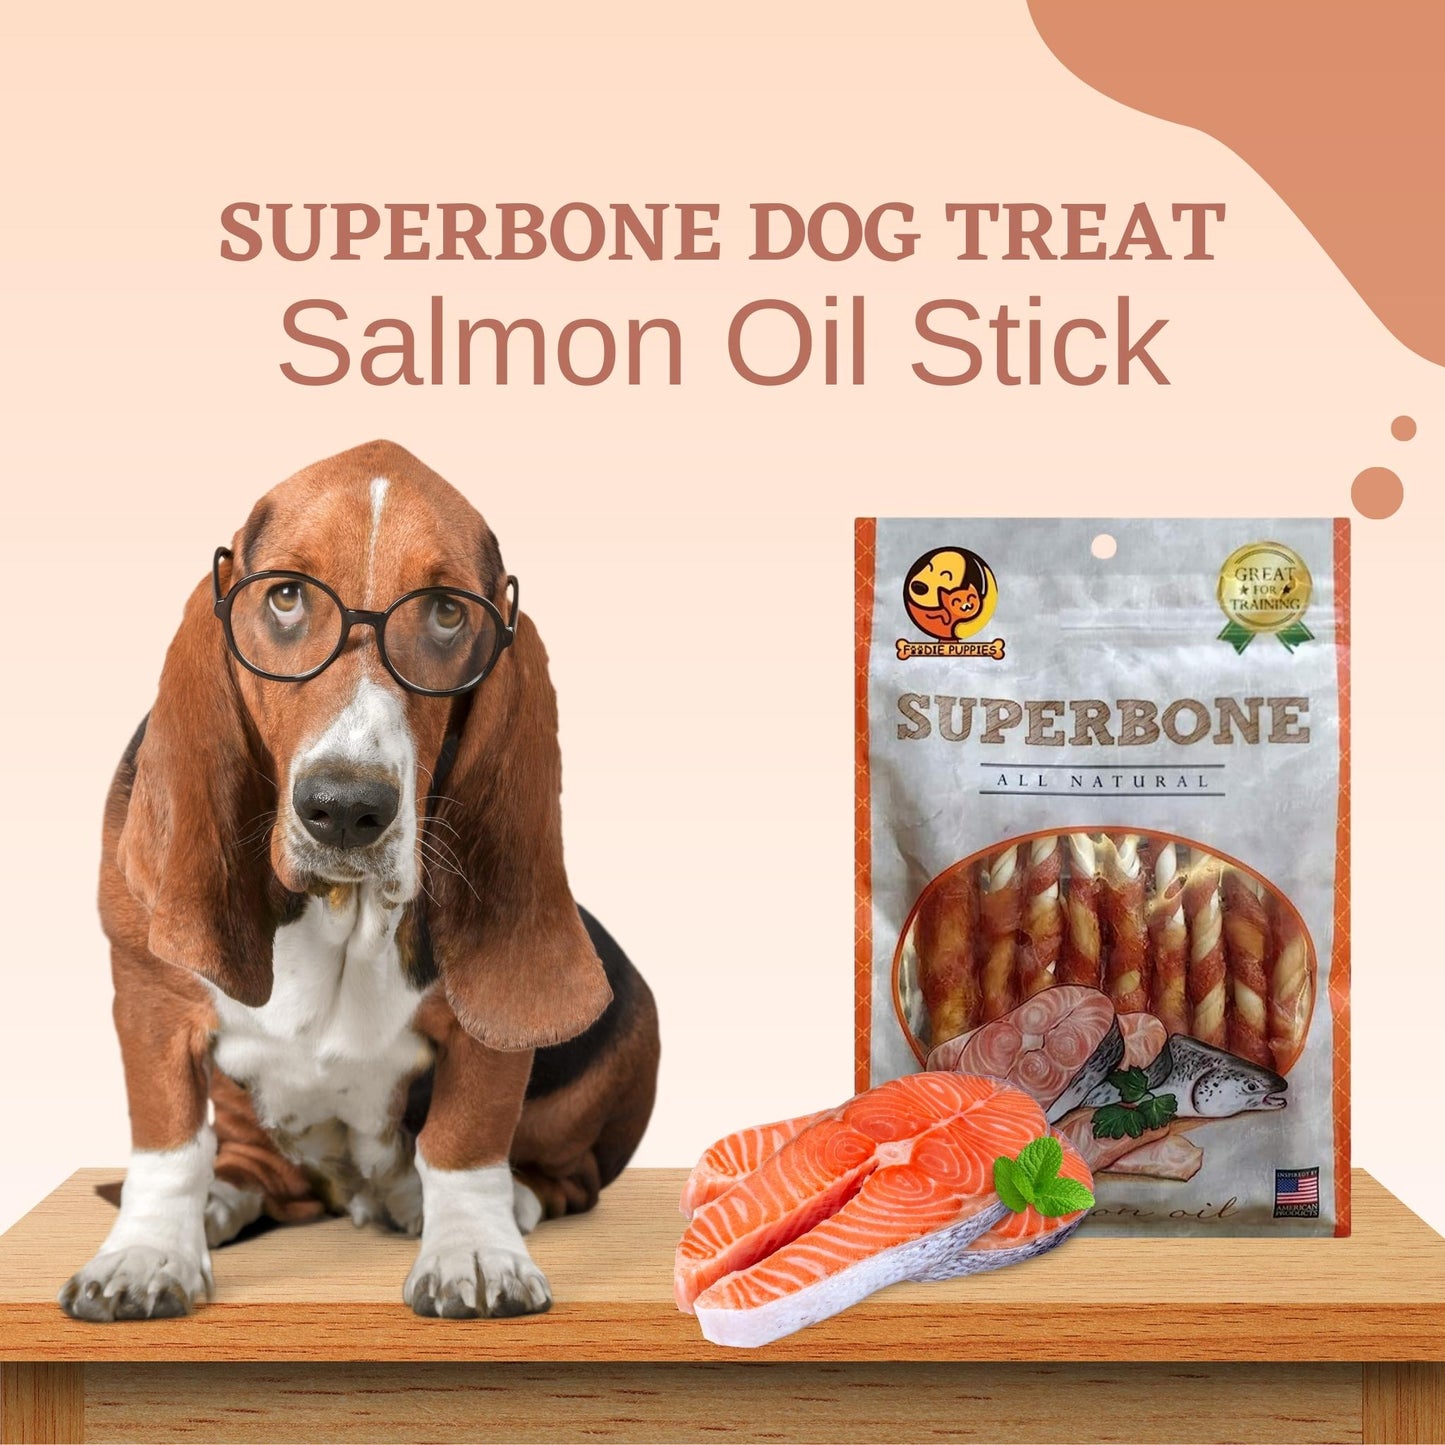 SuperBone All Natural Salmon Oil Stick Dog Treat - Pack of 2